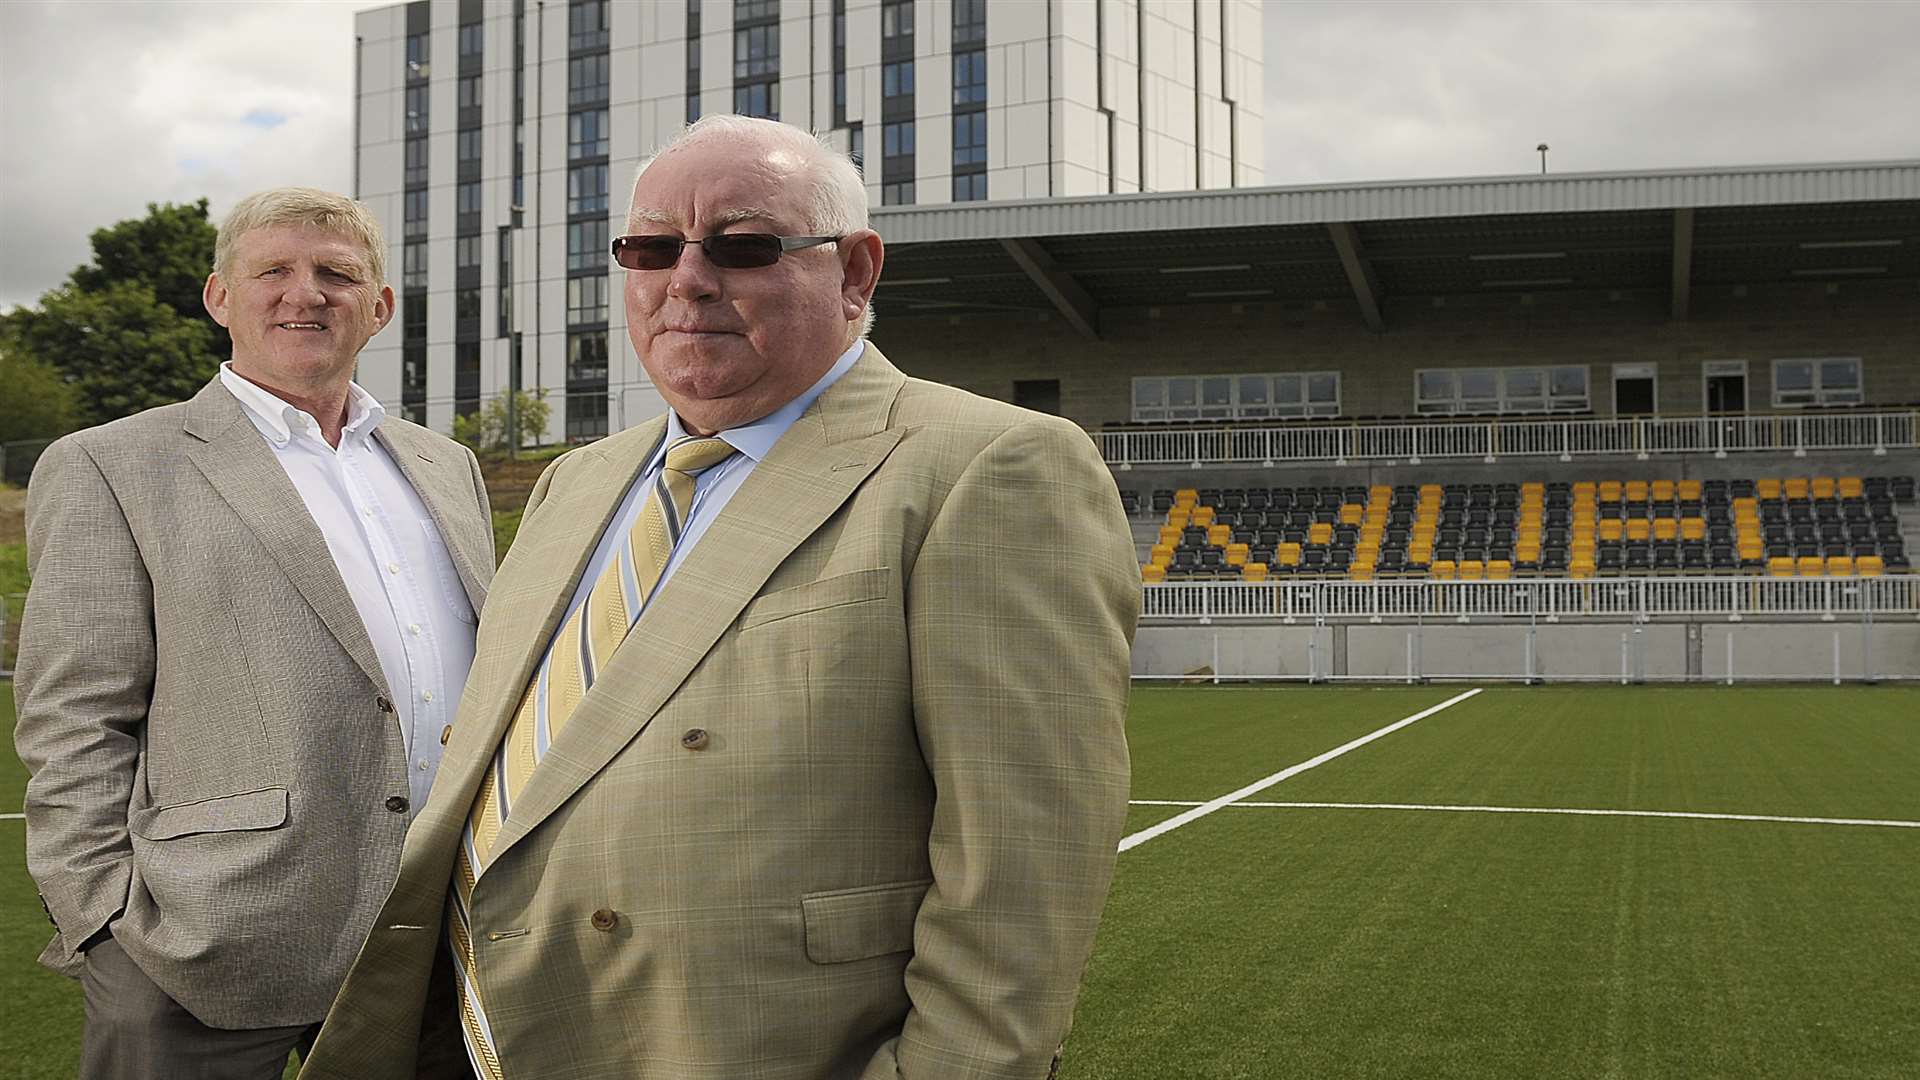 Terry Casey and Pat Gallagher at Maidstone Utd FC